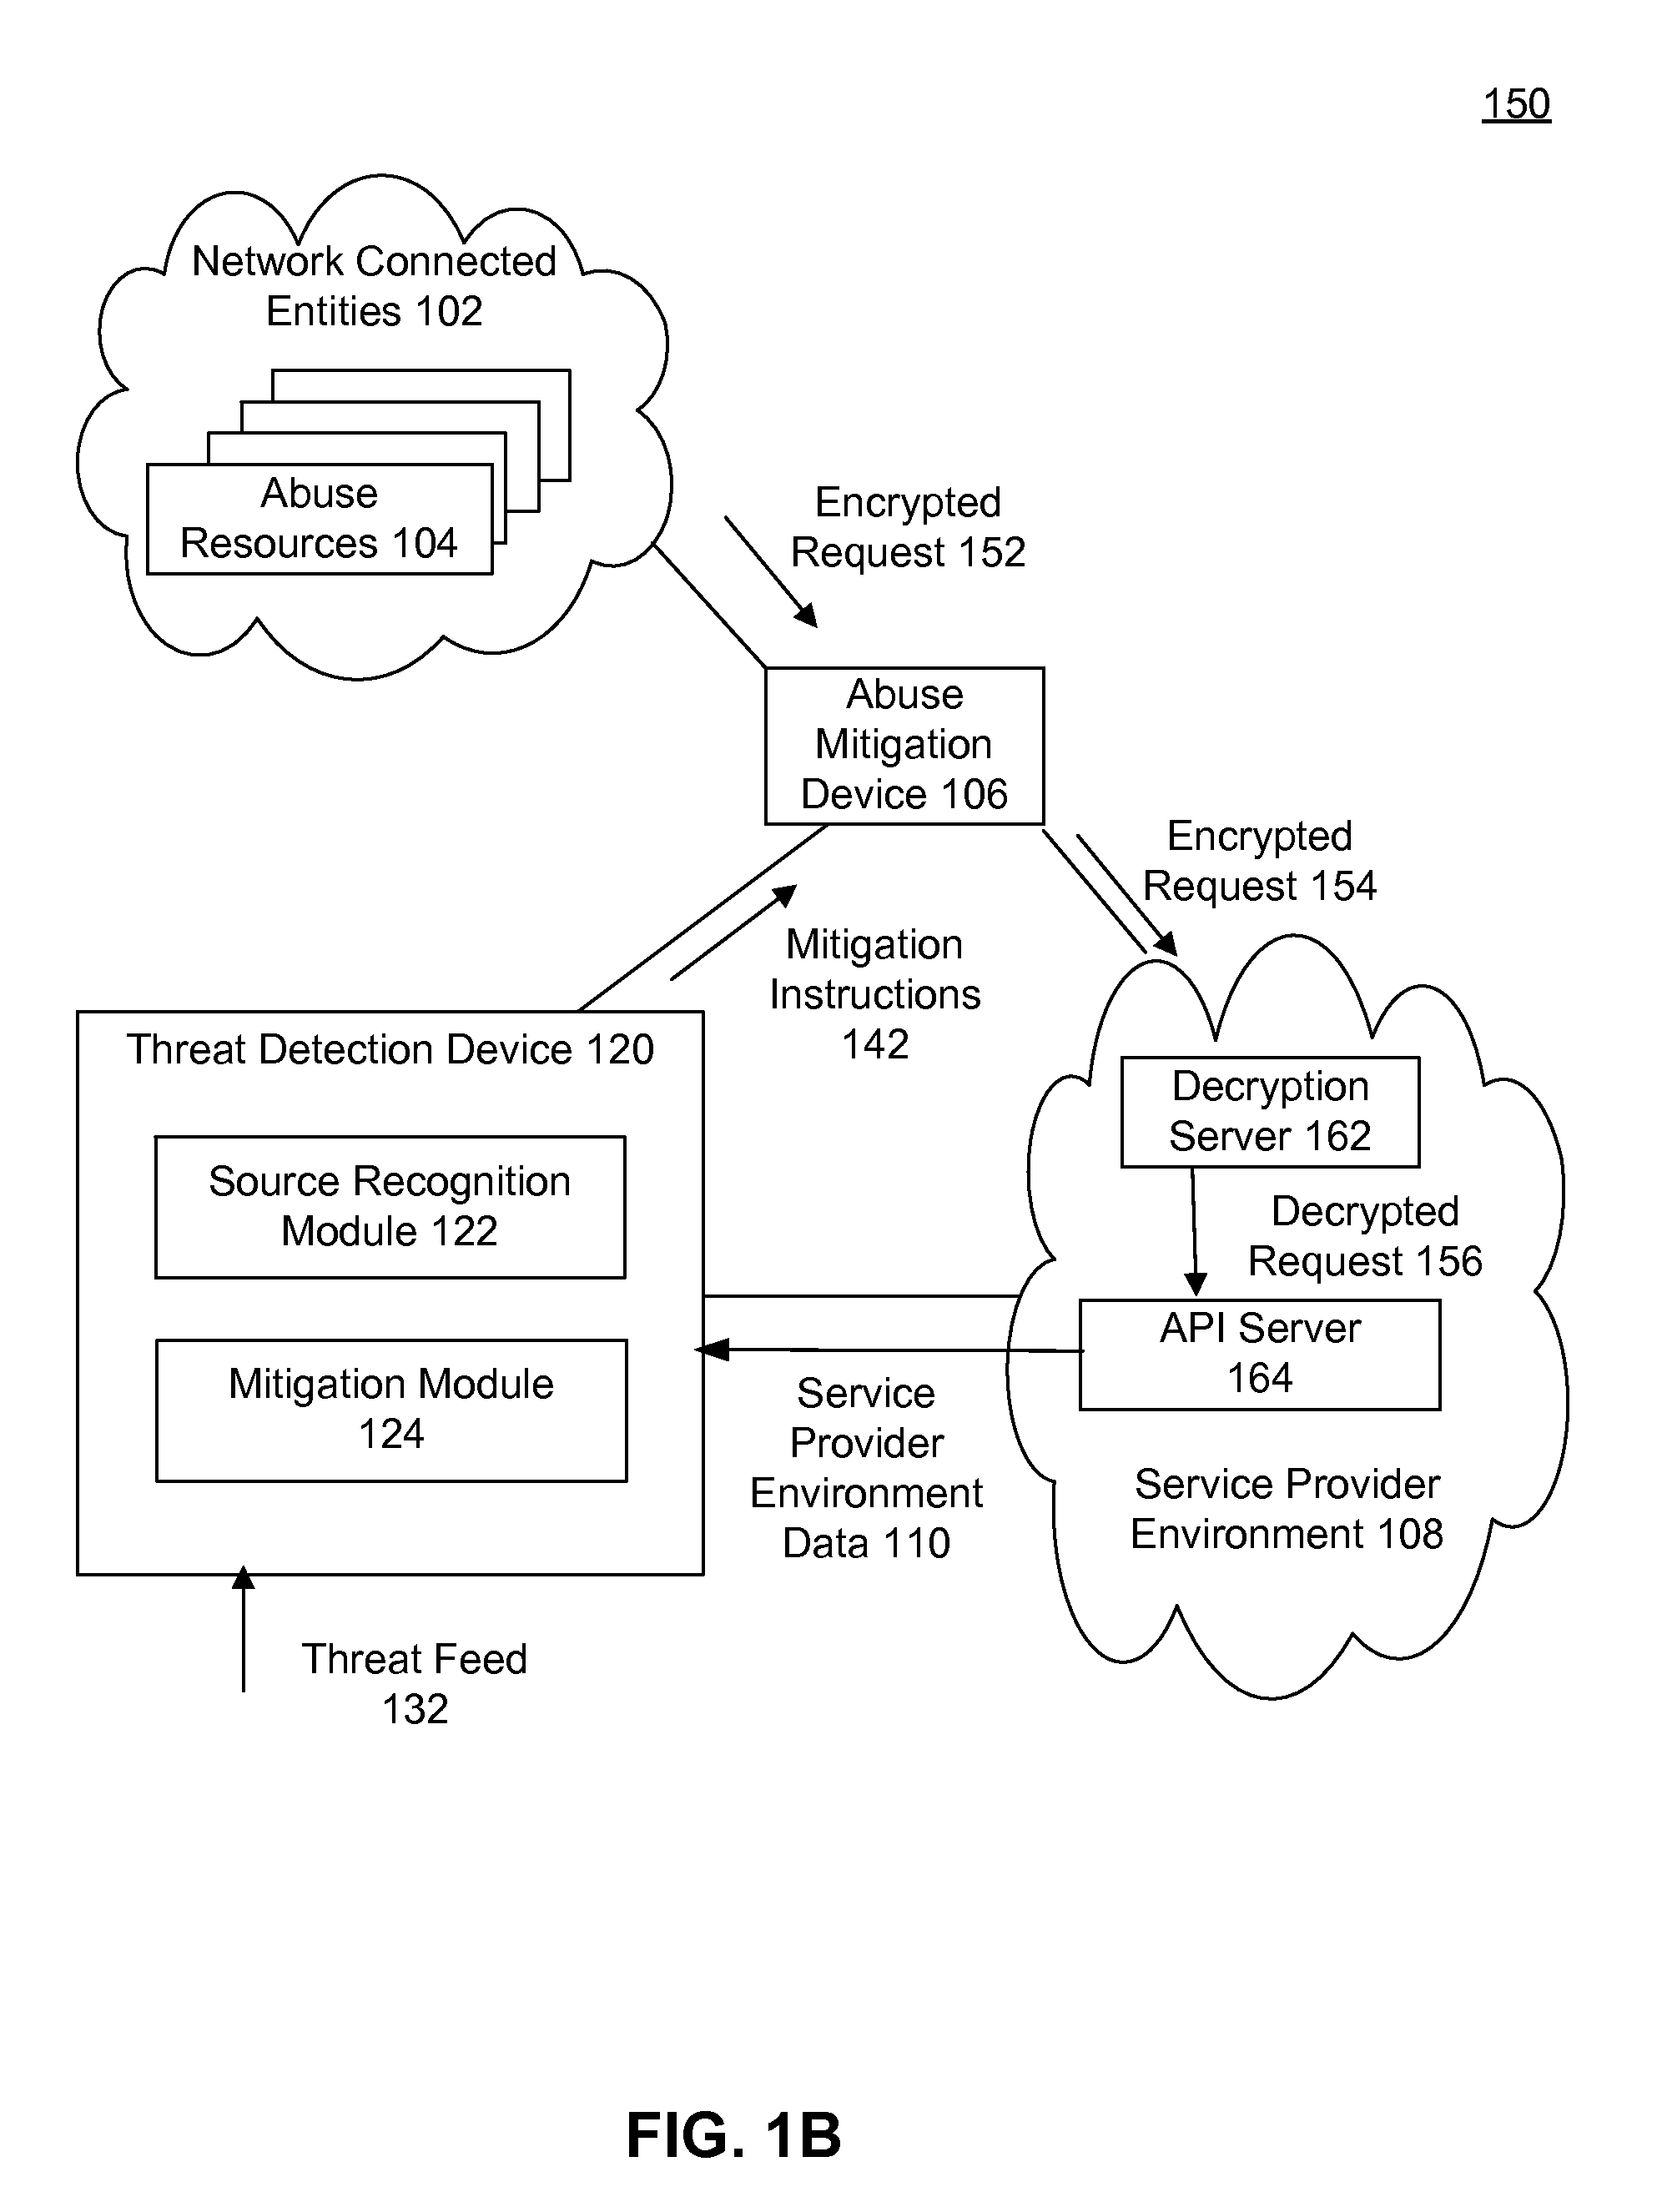 Application and network abuse detection with adaptive mitigation utilizing multi-modal intelligence data